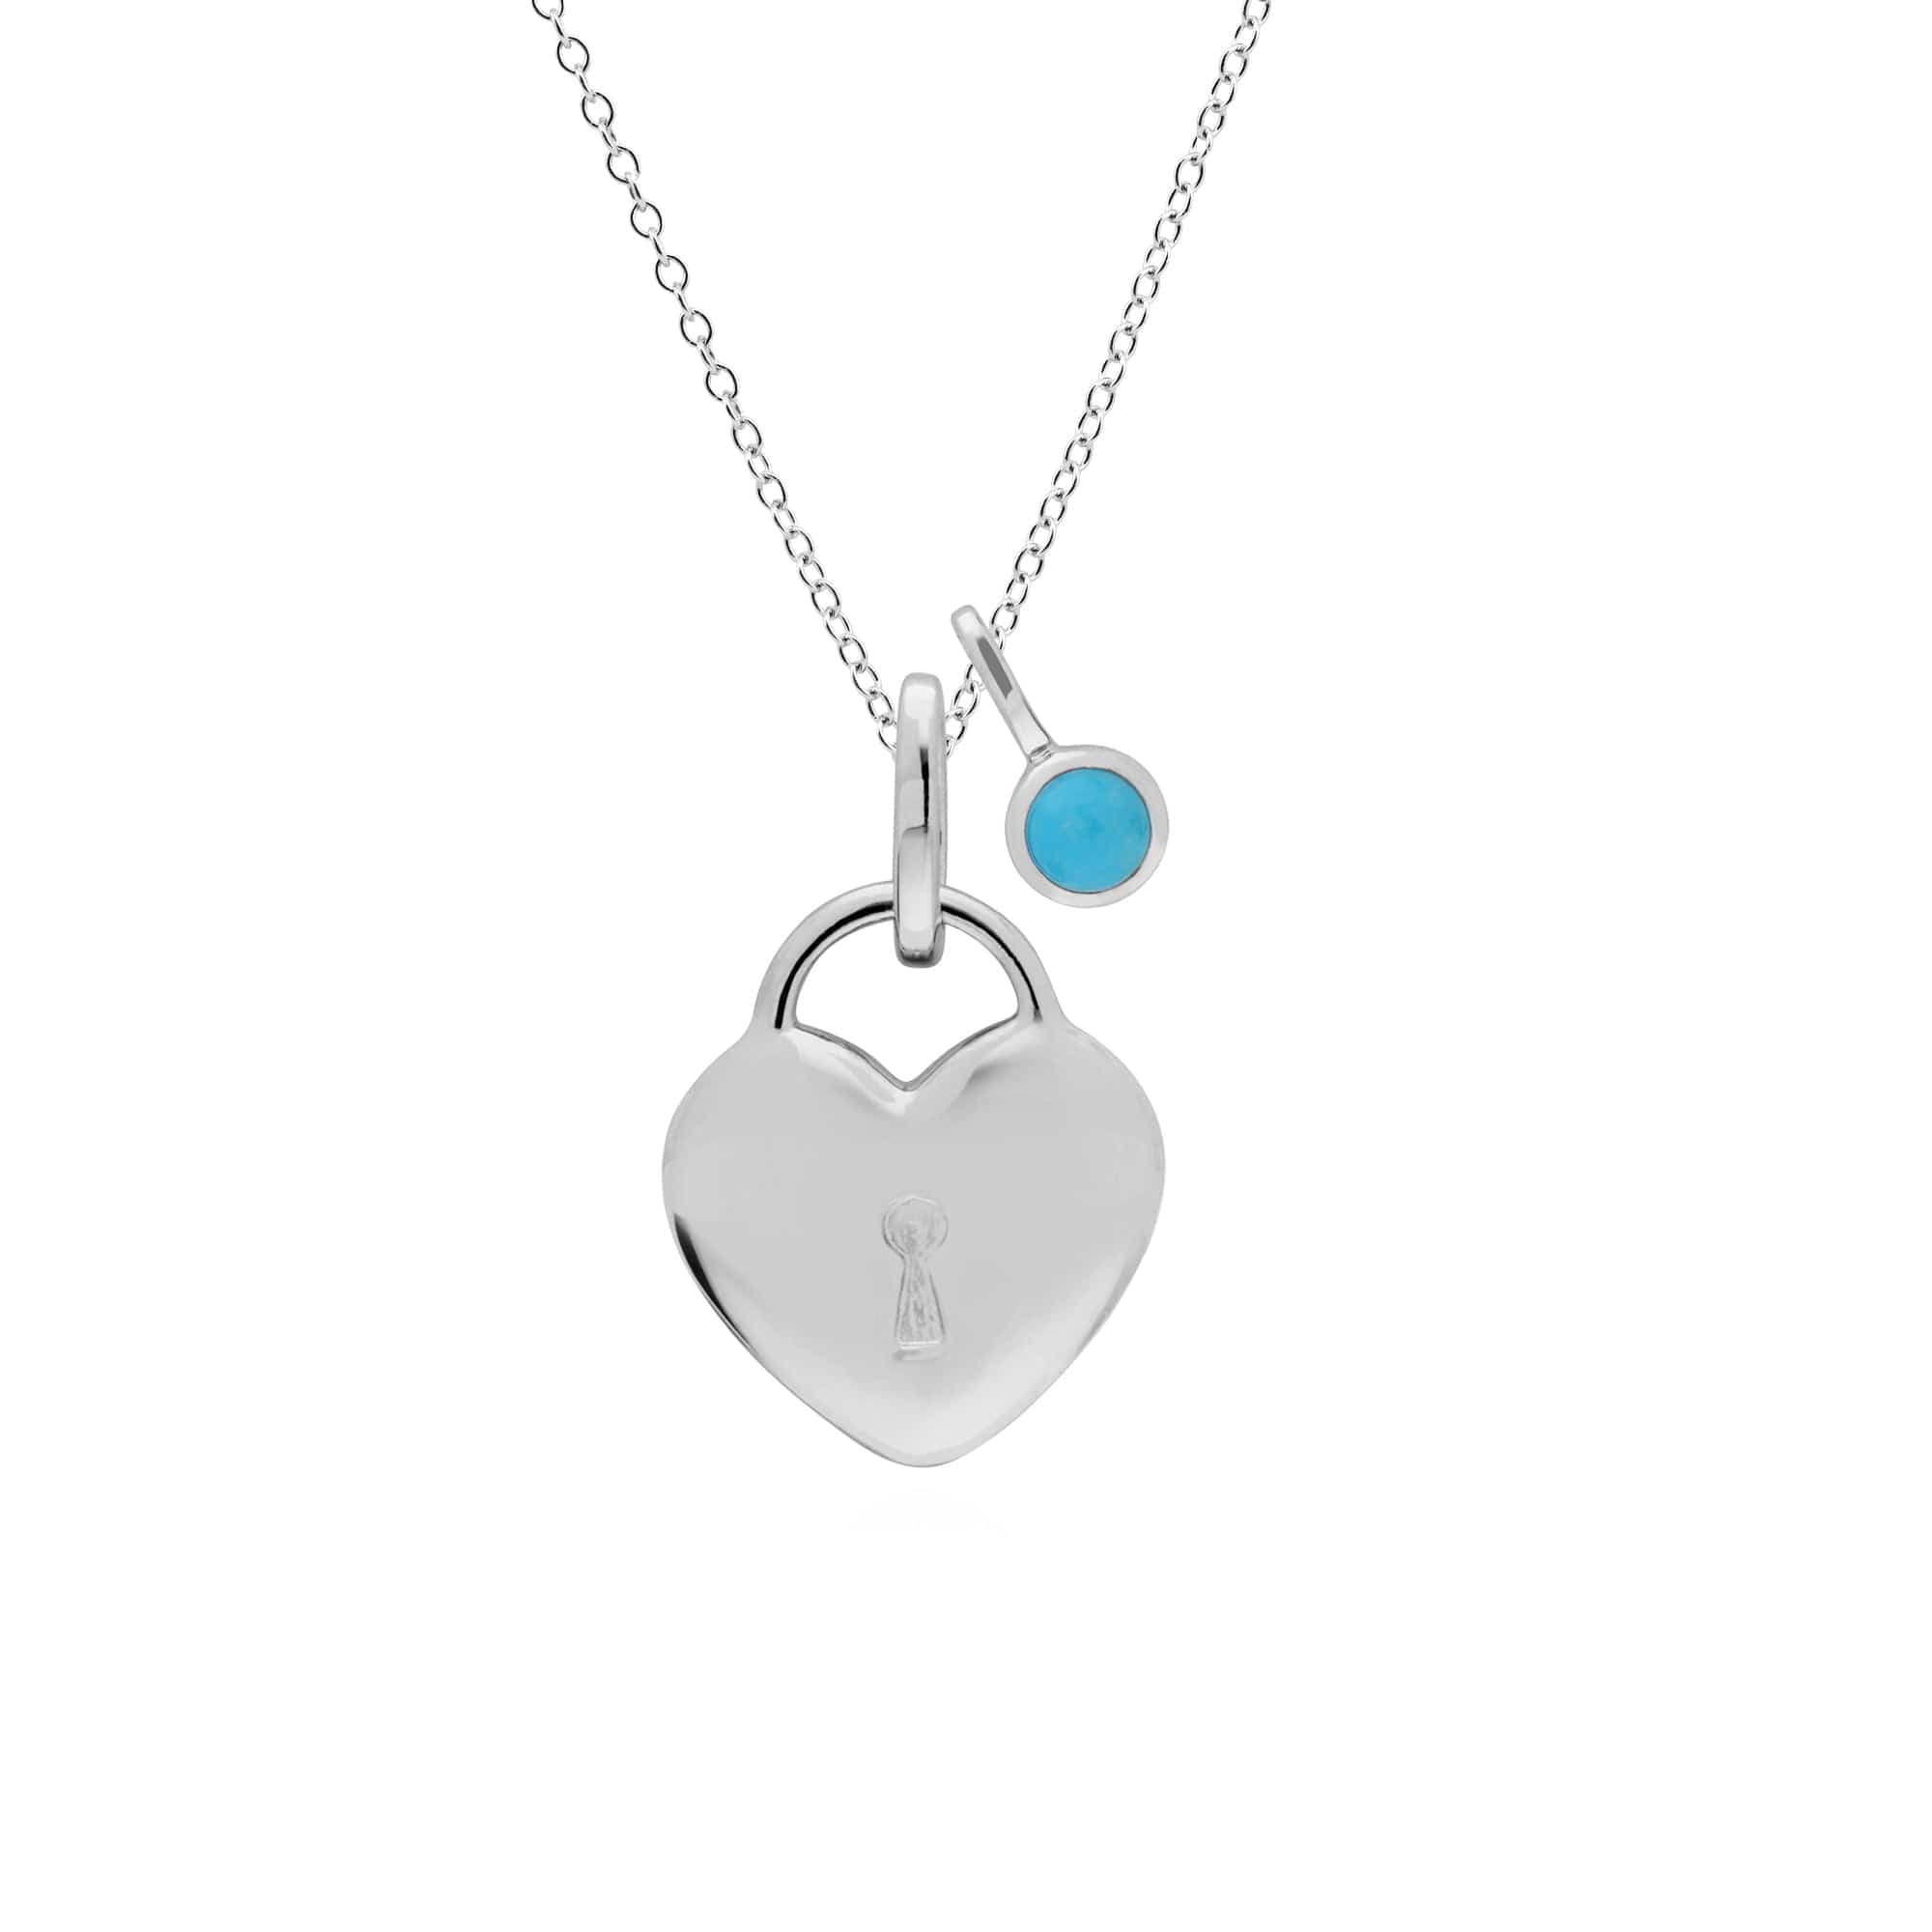 270P026001925-270P027001925 Classic Heart Lock Pendant & Turquoise Charm in 925 Sterling Silver 1